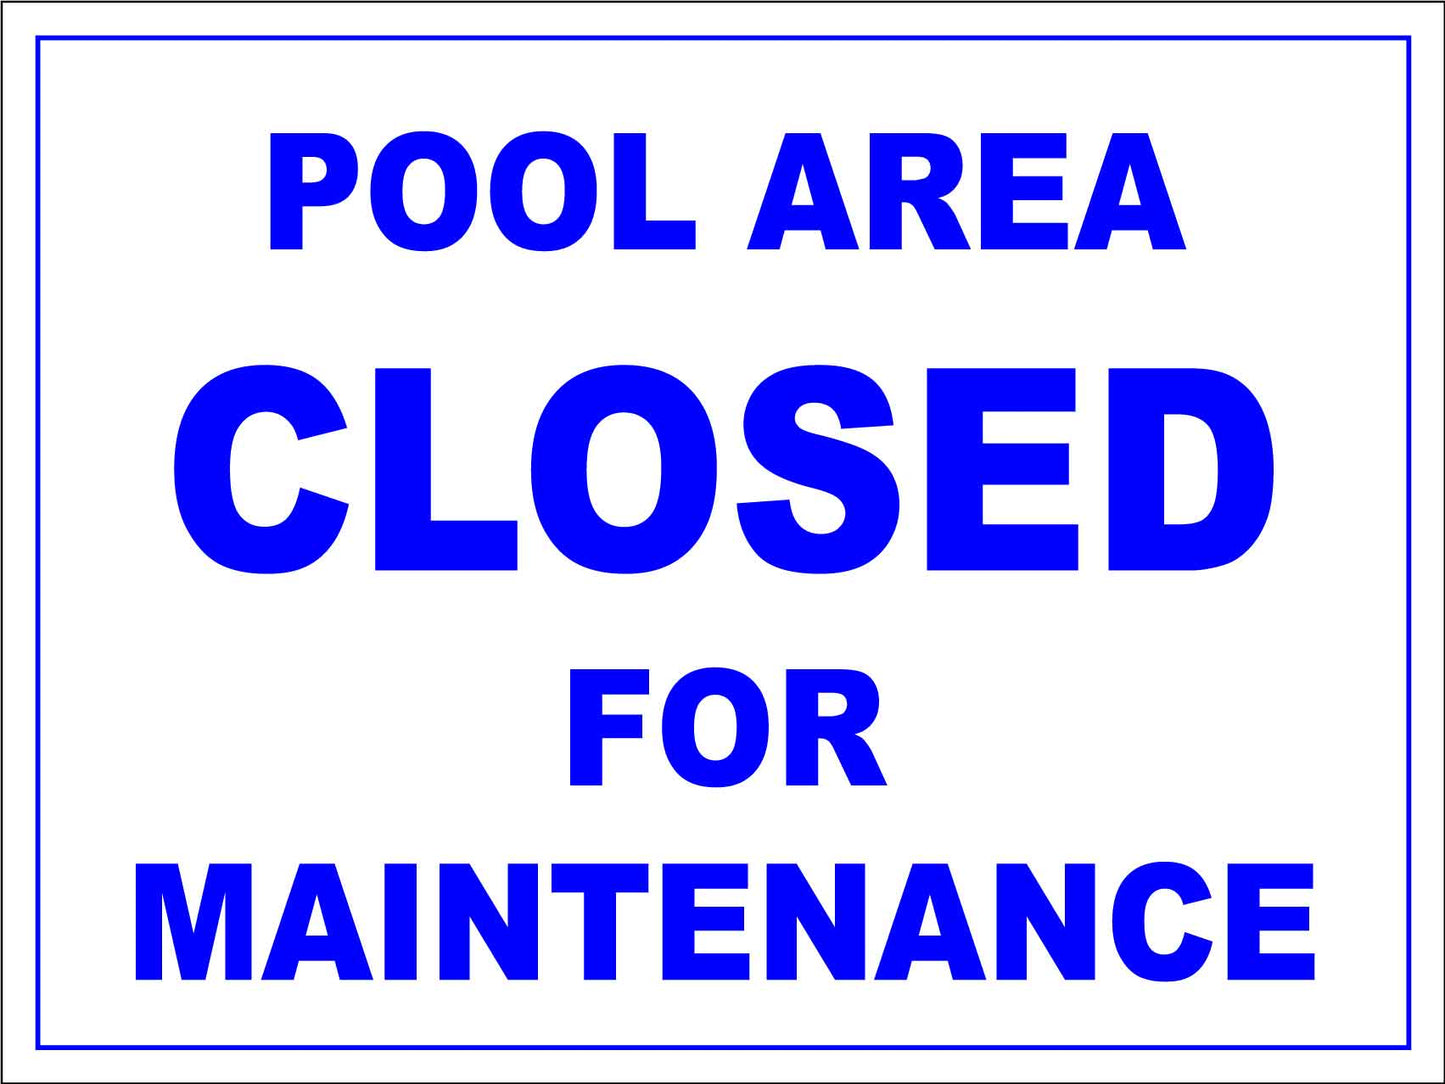 Pool Area Closed For Maintenance Sign